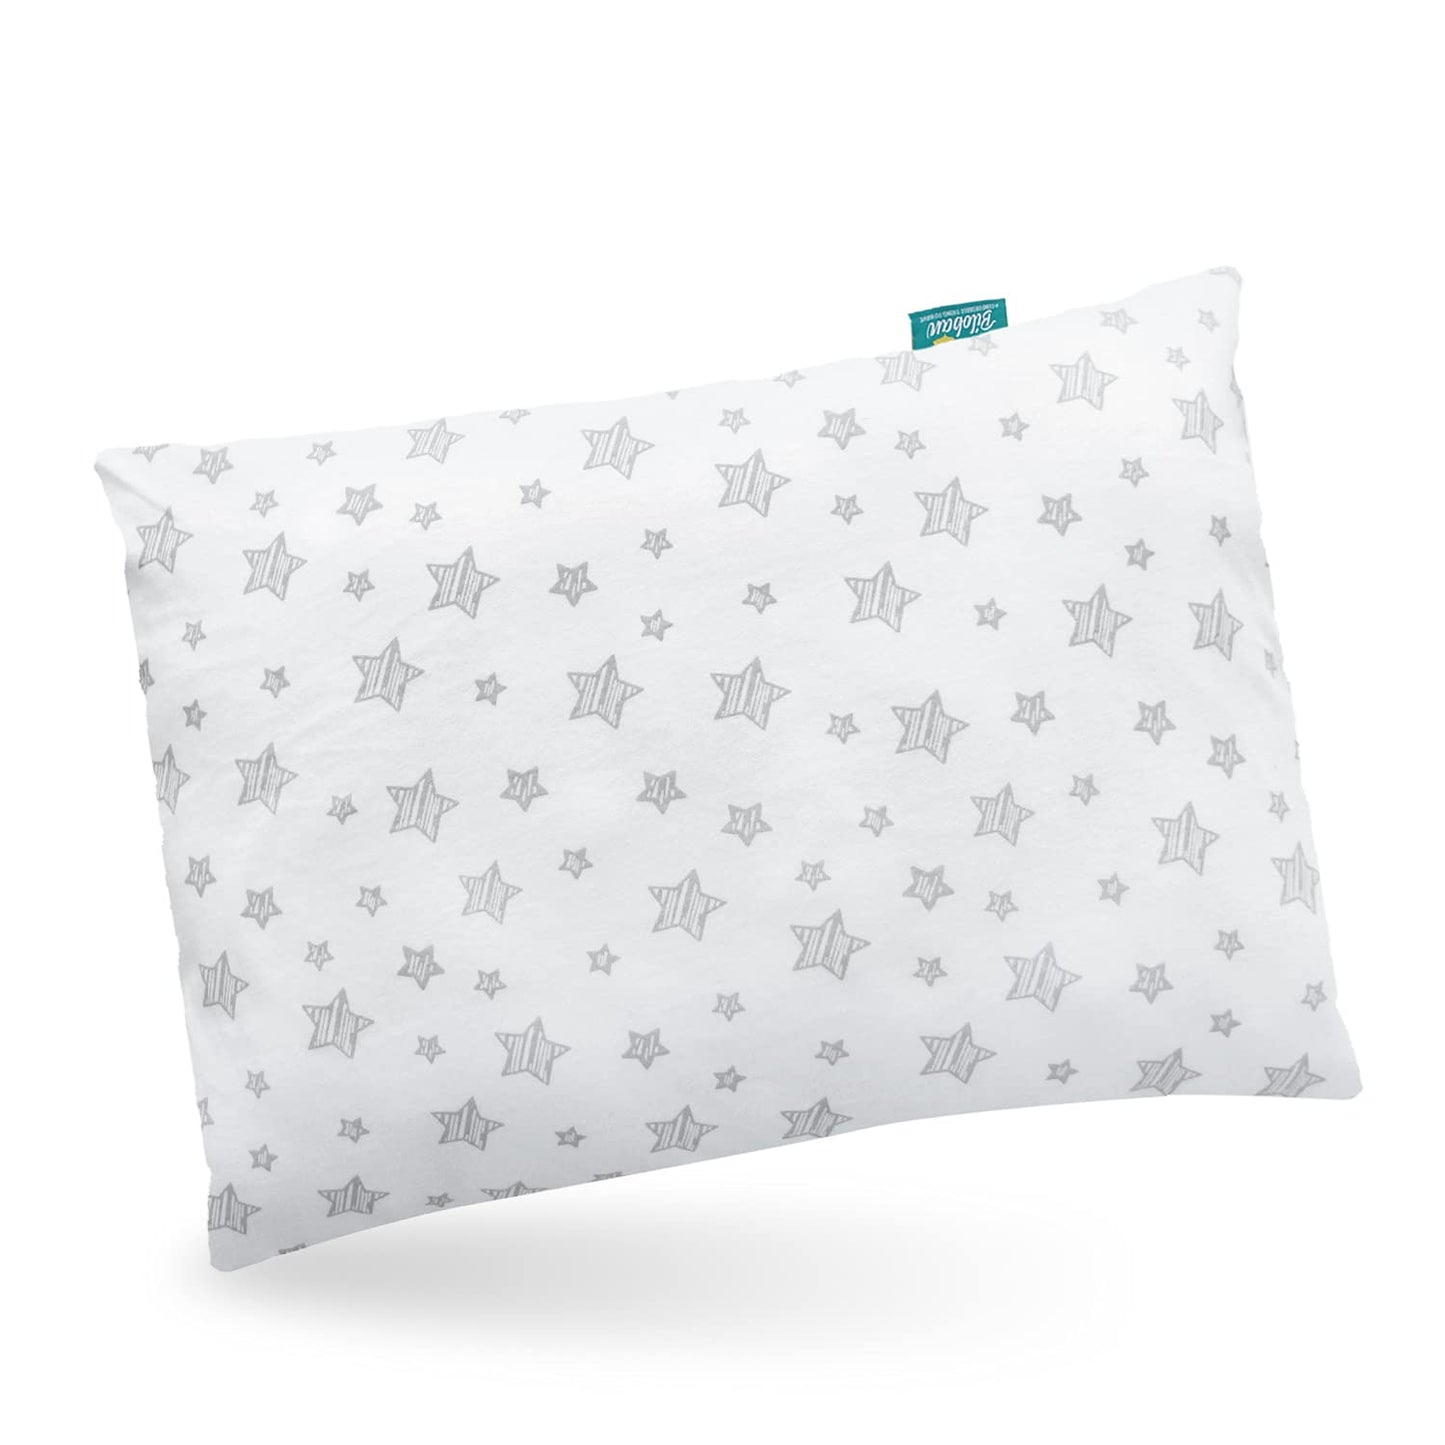 Toddler Pillow Quilted with Pillowcase - 13" x 18", 100% Cotton, Ultra Soft & Breathable, White Stars - Biloban Online Store